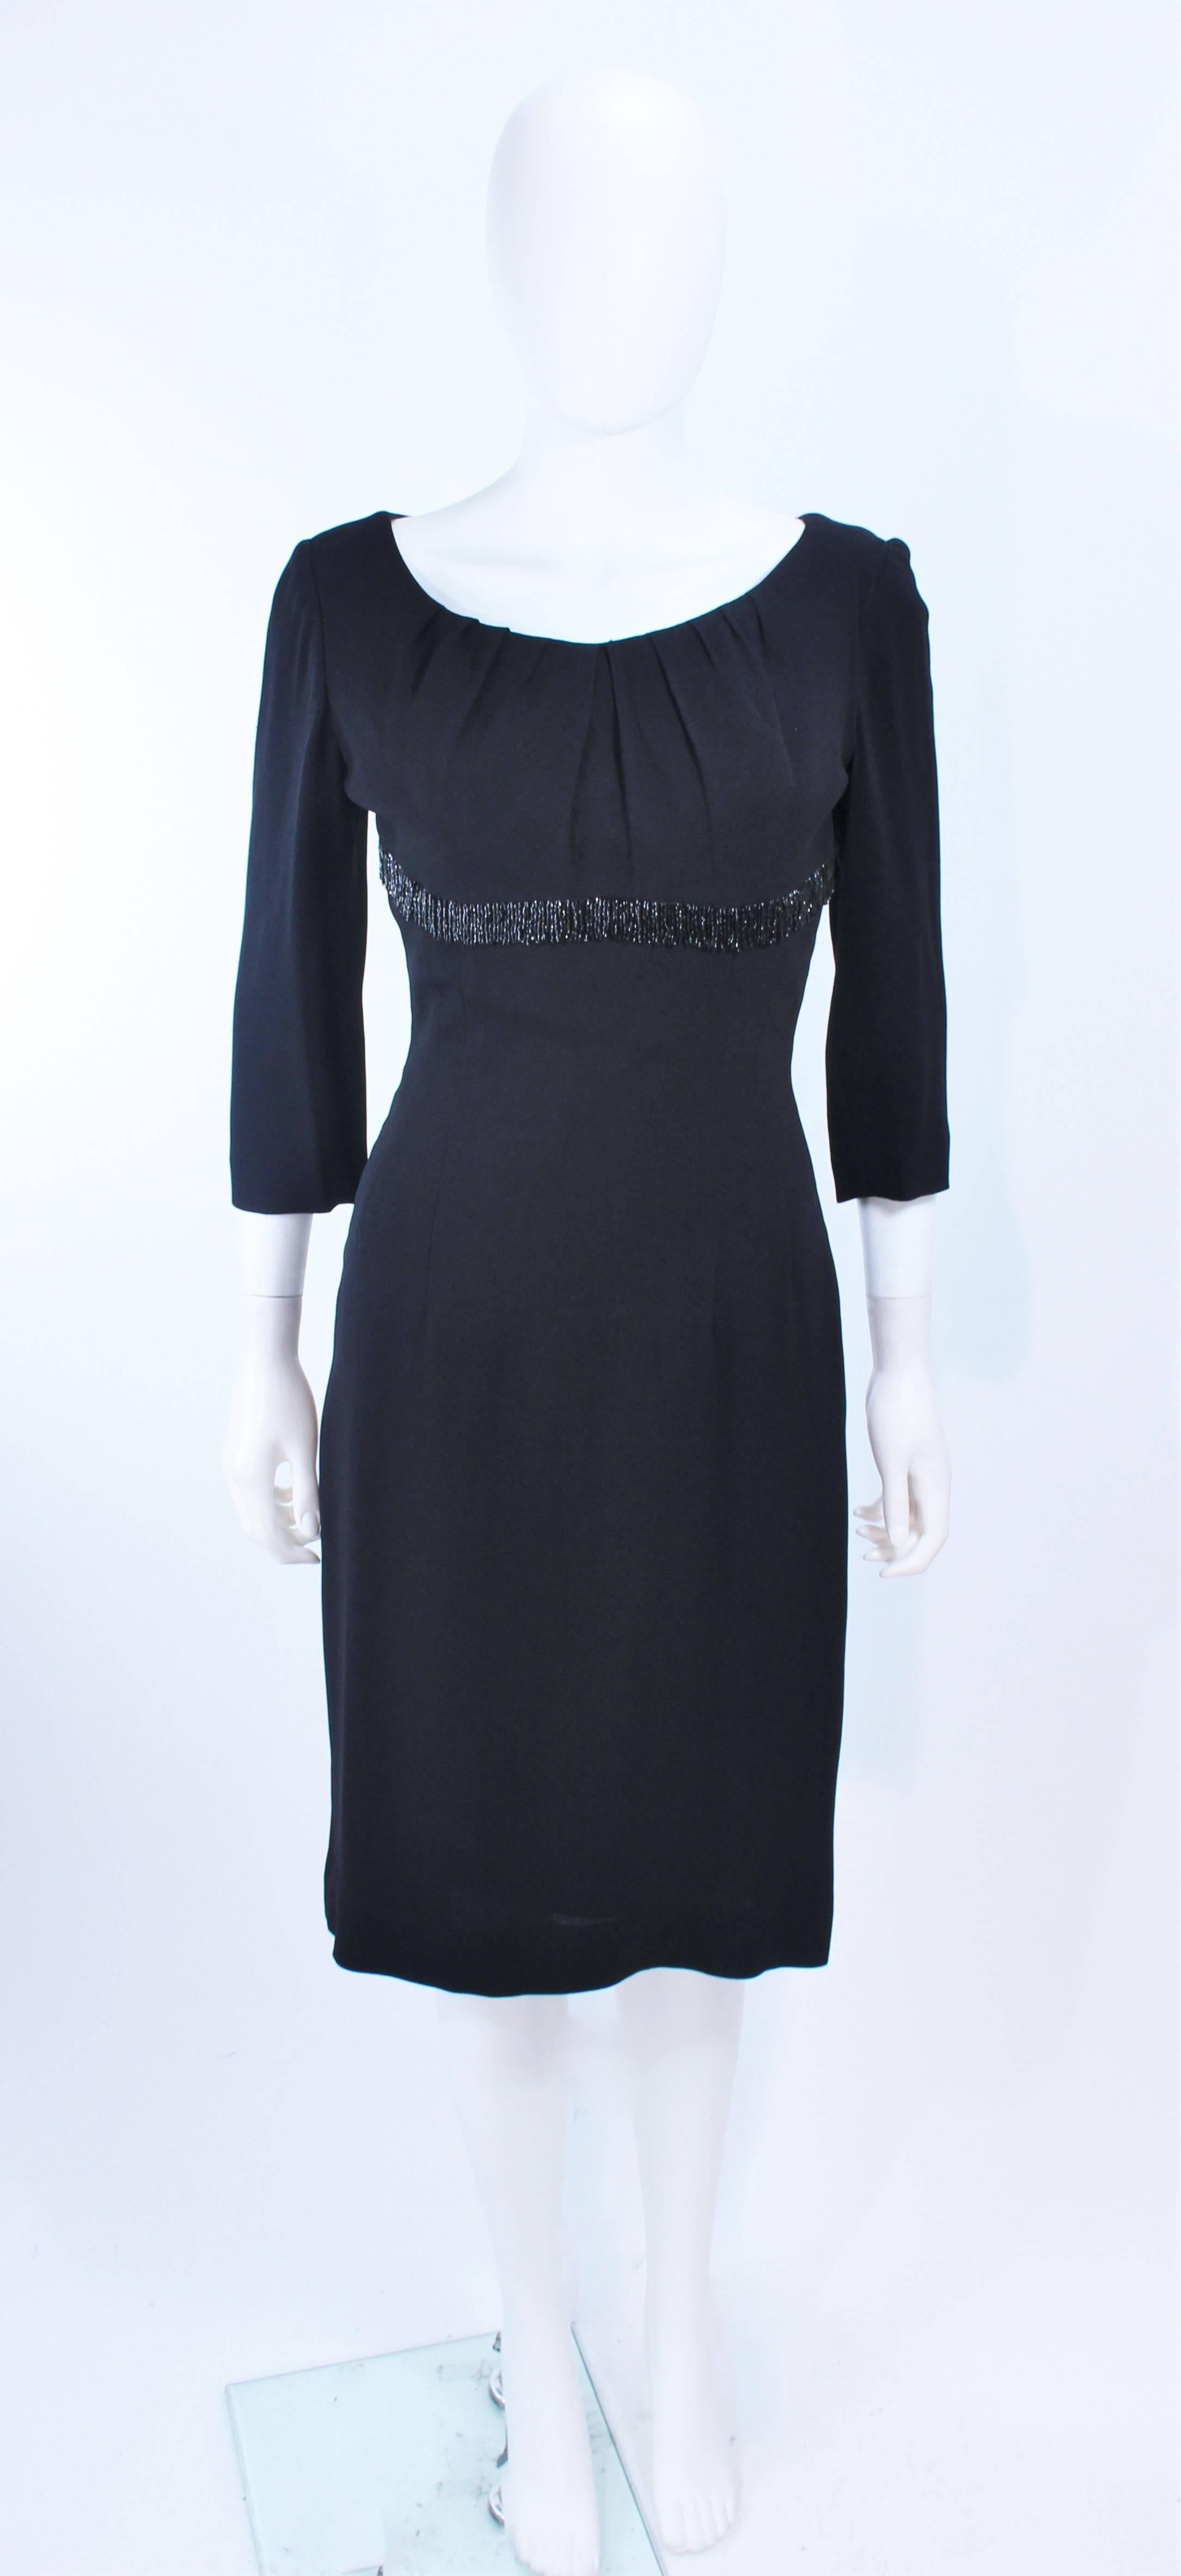 This Kat Dauzig design is composed of a black silk crepe with a beaded empire waist detail. Features 3/4 length sleeves with a pleated round collar. There is a zipper closure. In excellent vintage condition.

**Please cross-reference measurements